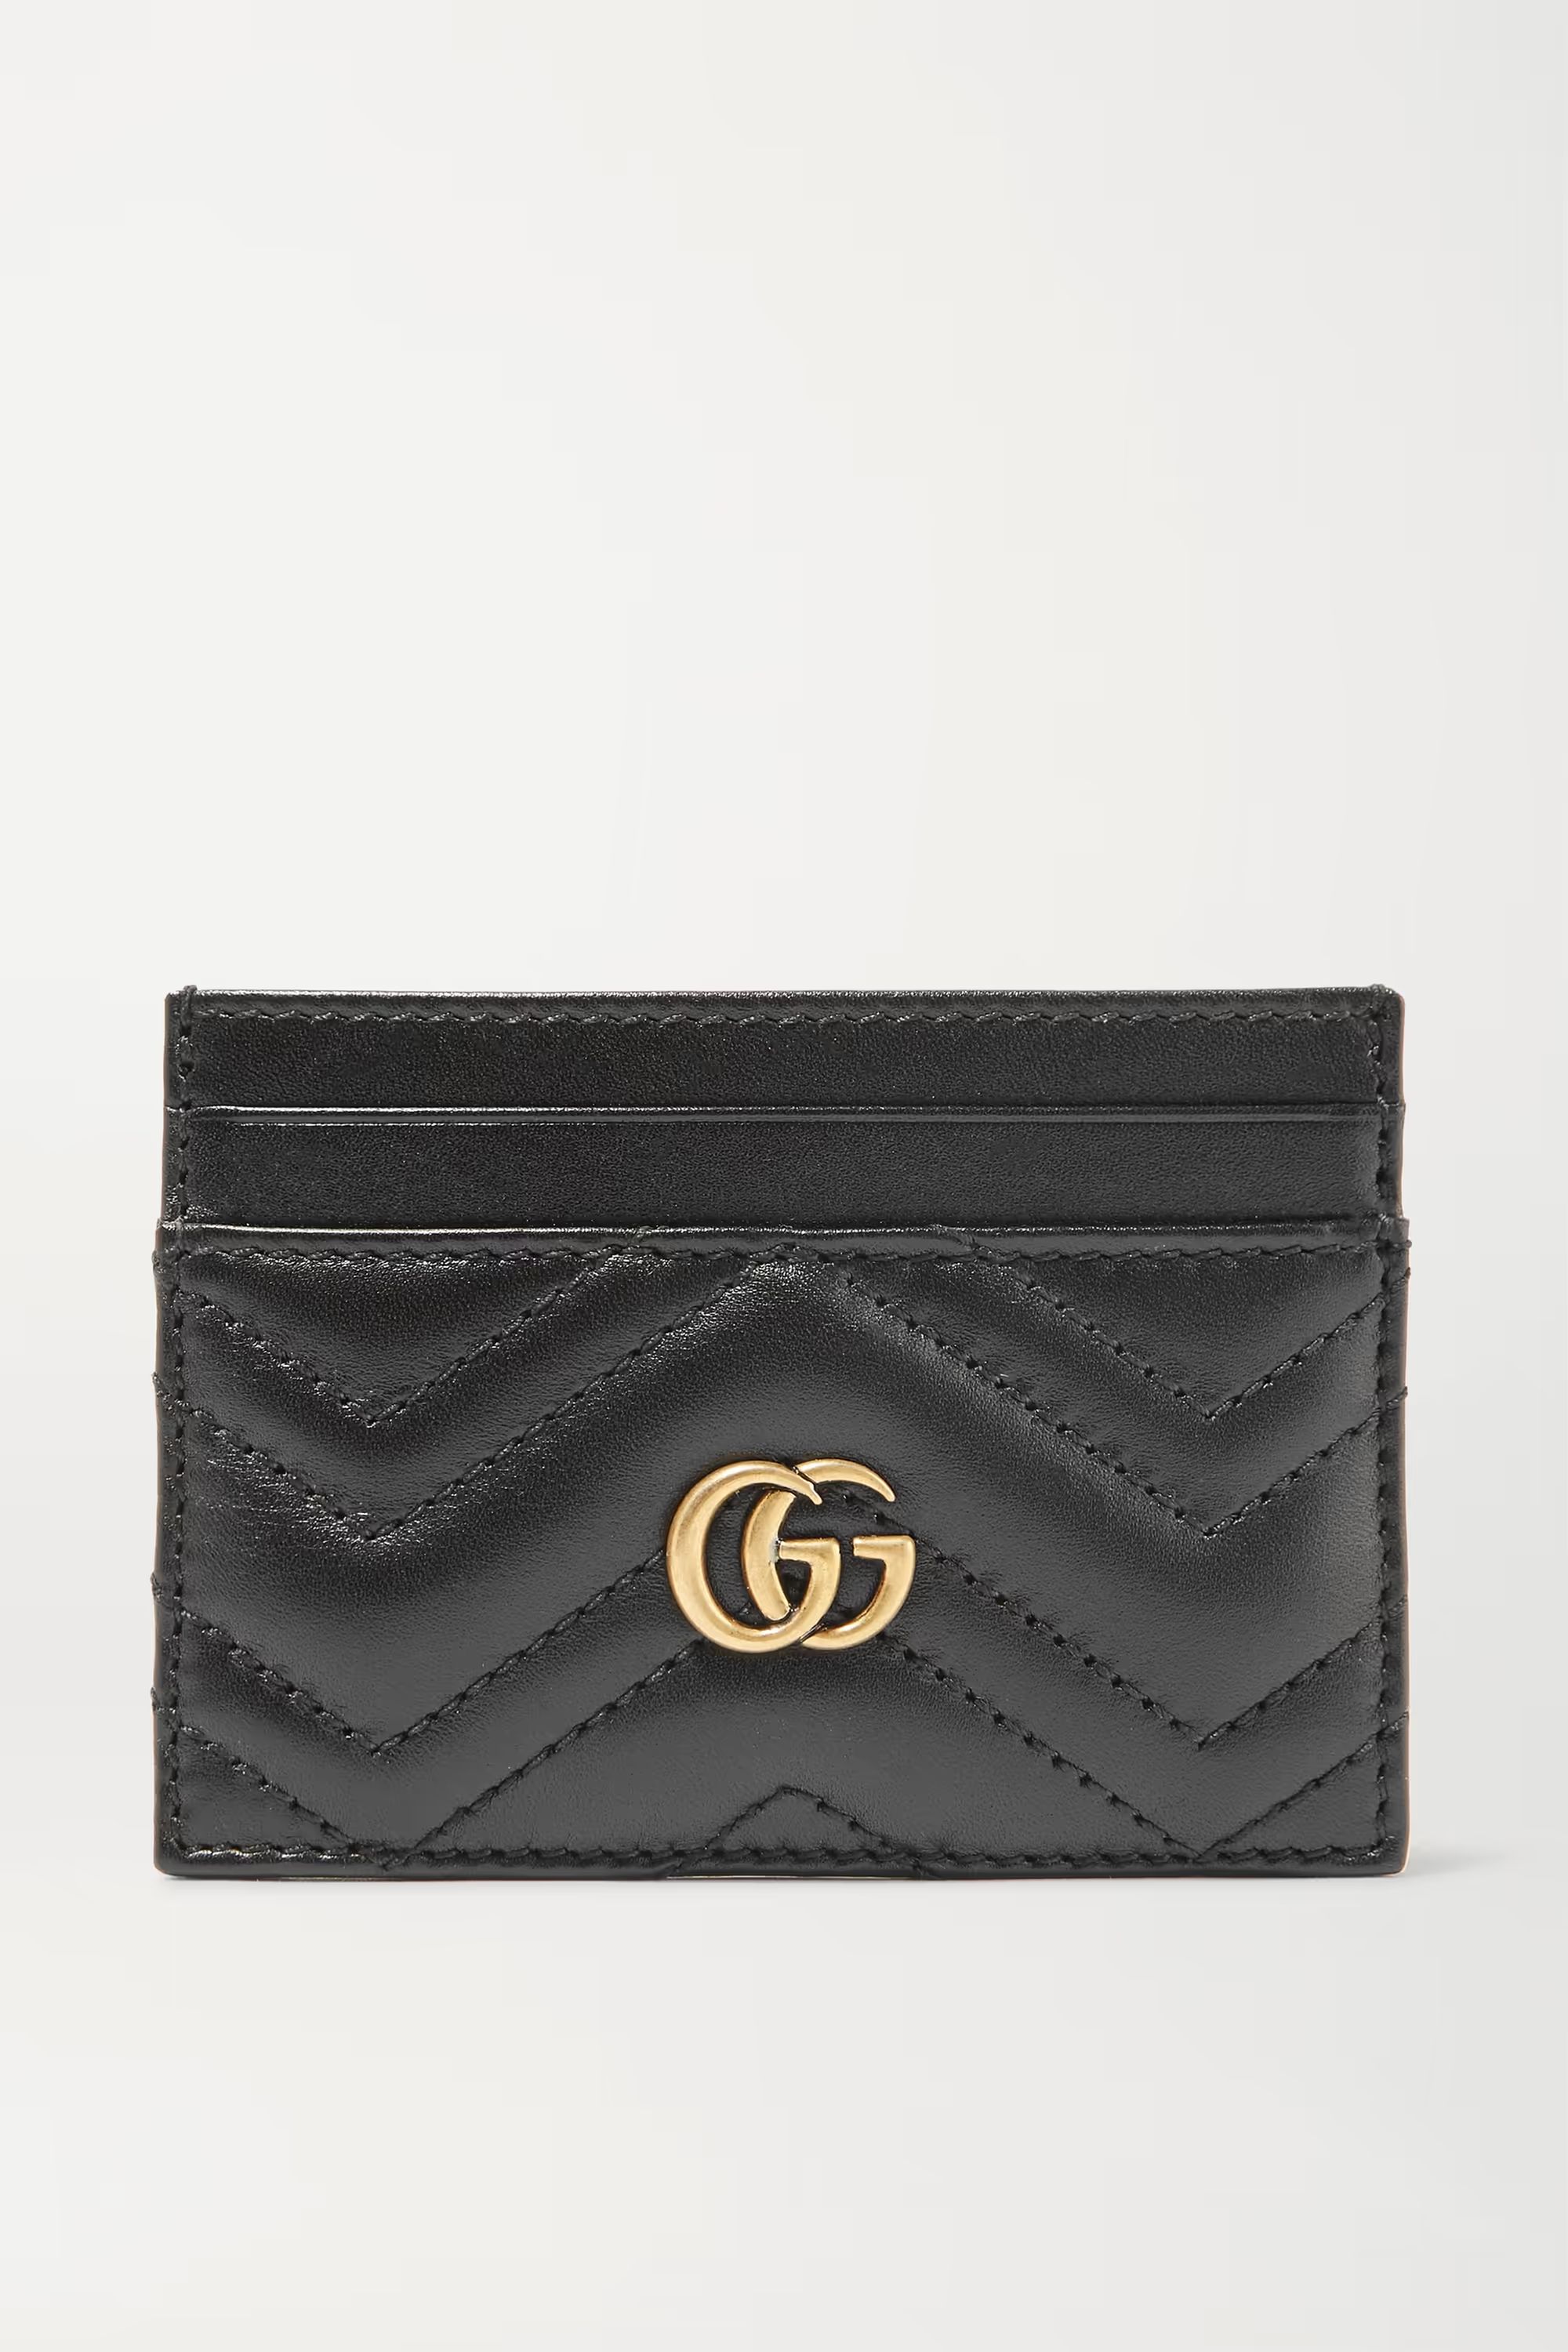 GUCCIGG Marmont quilted leather cardholder | NET-A-PORTER (US)